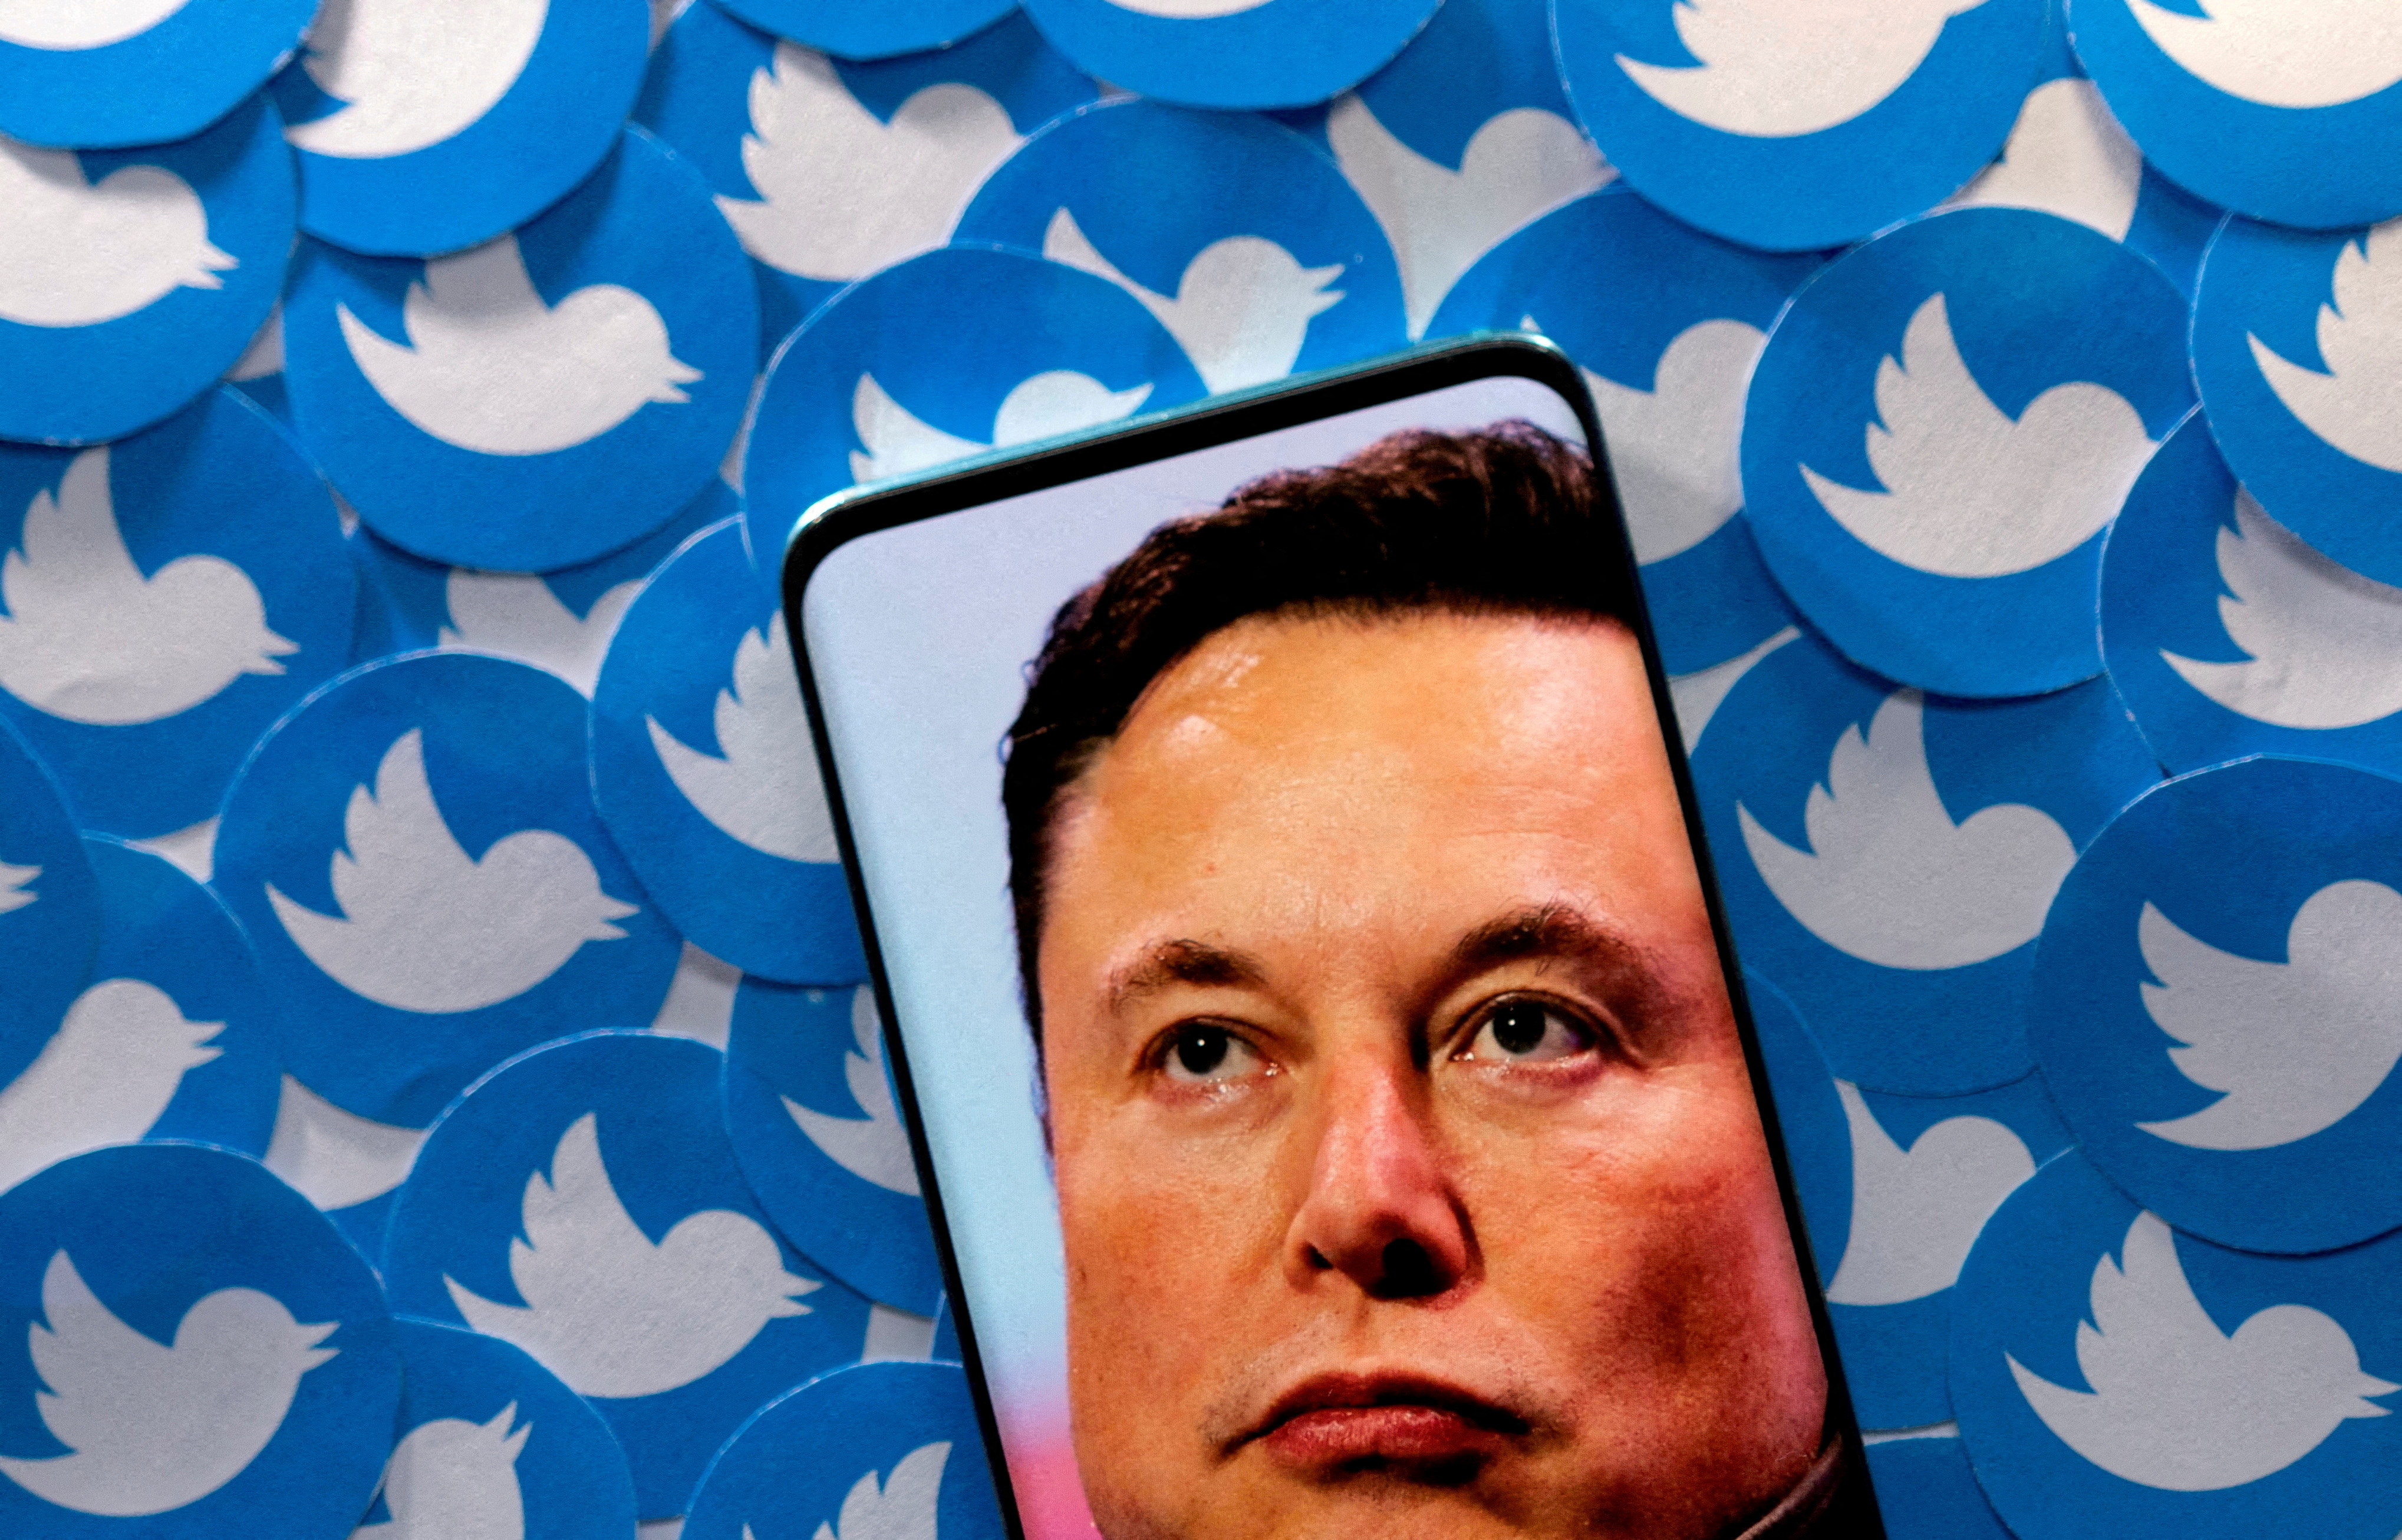 The feud between Twitter and Elon Musk continues after the purchase failed (REUTERS / Given Ruvic / Illustration)